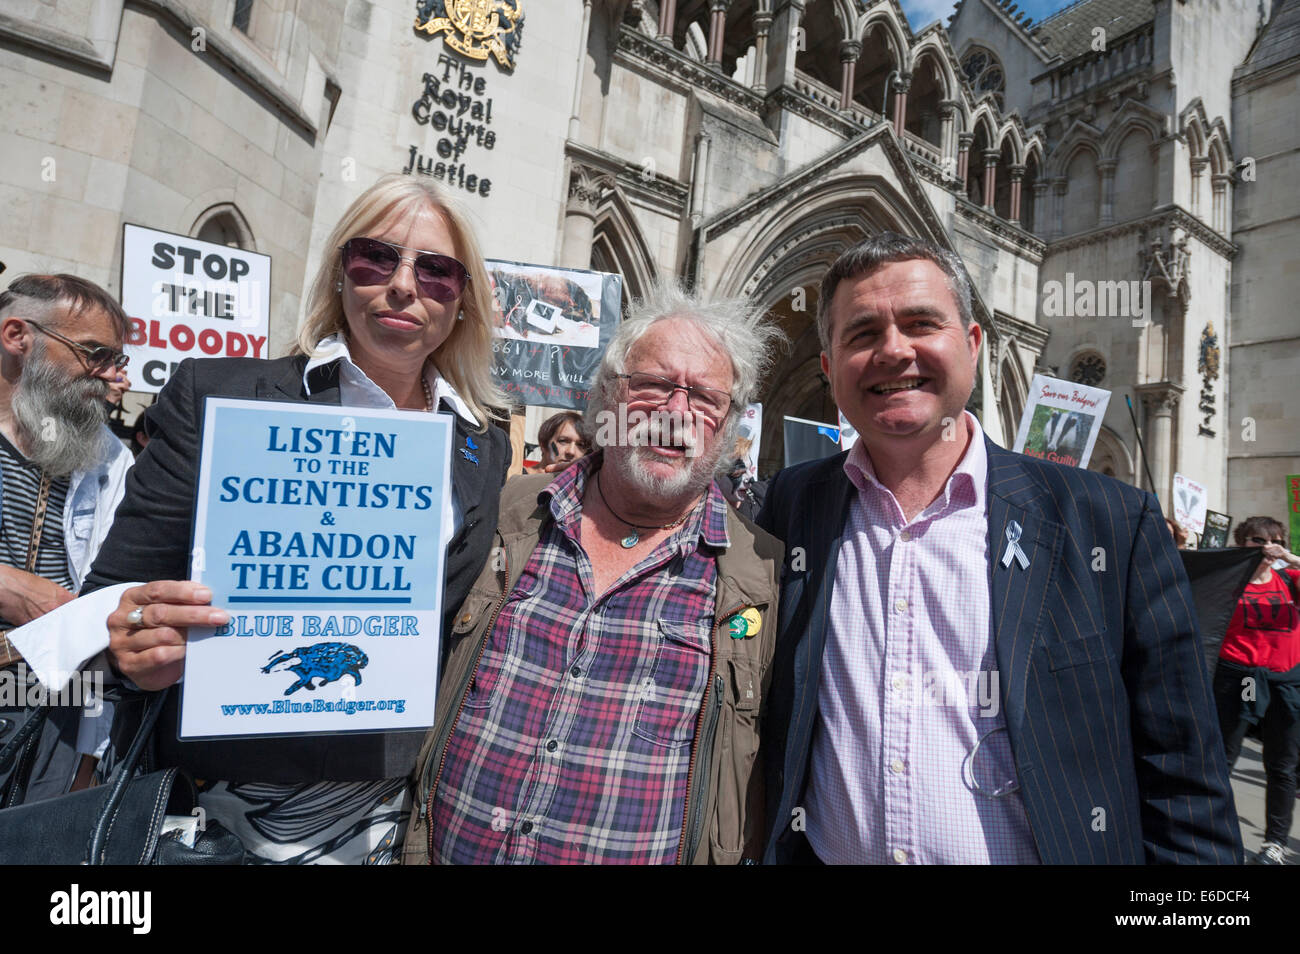 Royal Courts of Justice, London, UK. 21st August 2014. A large crowd of anti badger cull protesters gathered outside the Royal Courts of Justice as The Badger Trust was in court with a new legal challenge over the government’s badger cull policy. The organisation wants a High Court ruling stating that there has been an unlawful failure to put in place an independent panel of experts to oversee this year’s planned cull in Gloucestershire and Somerset. Pictured: Bill Oddie (centre); Dominic Dyer (right). Credit:  Lee Thomas/Alamy Live News Stock Photo